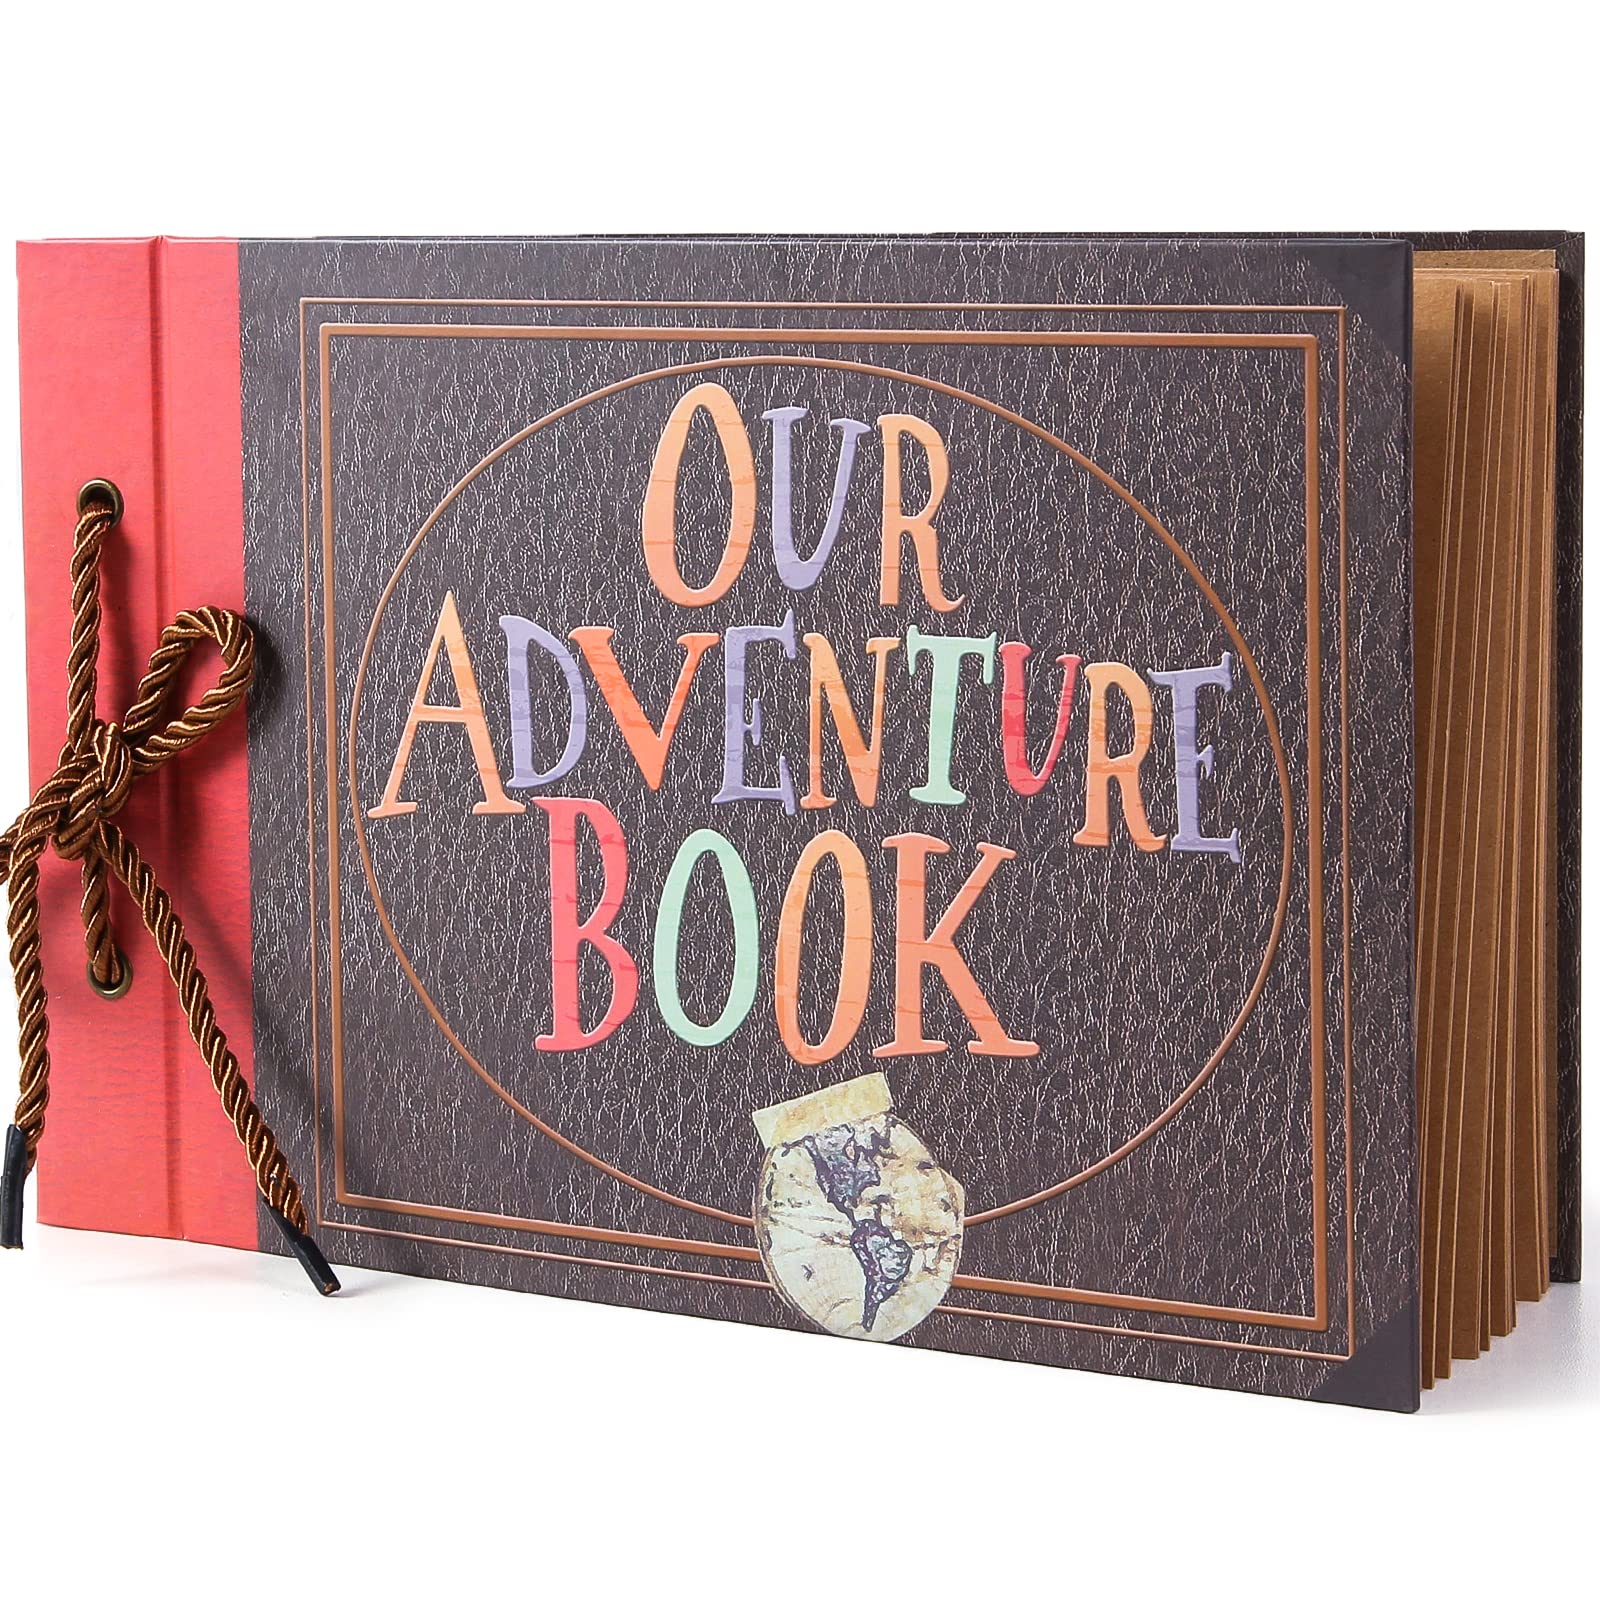 Pulaisen Our Adventure Book Scrapbook Pixar Up Handmade DIY Family  Scrapbooking Album with Embossed Letter Cover Retro Photo Albums (Our Adventure  Book 11.8Lx7.6W) Our Adventure Book 11.8Lx7.6W